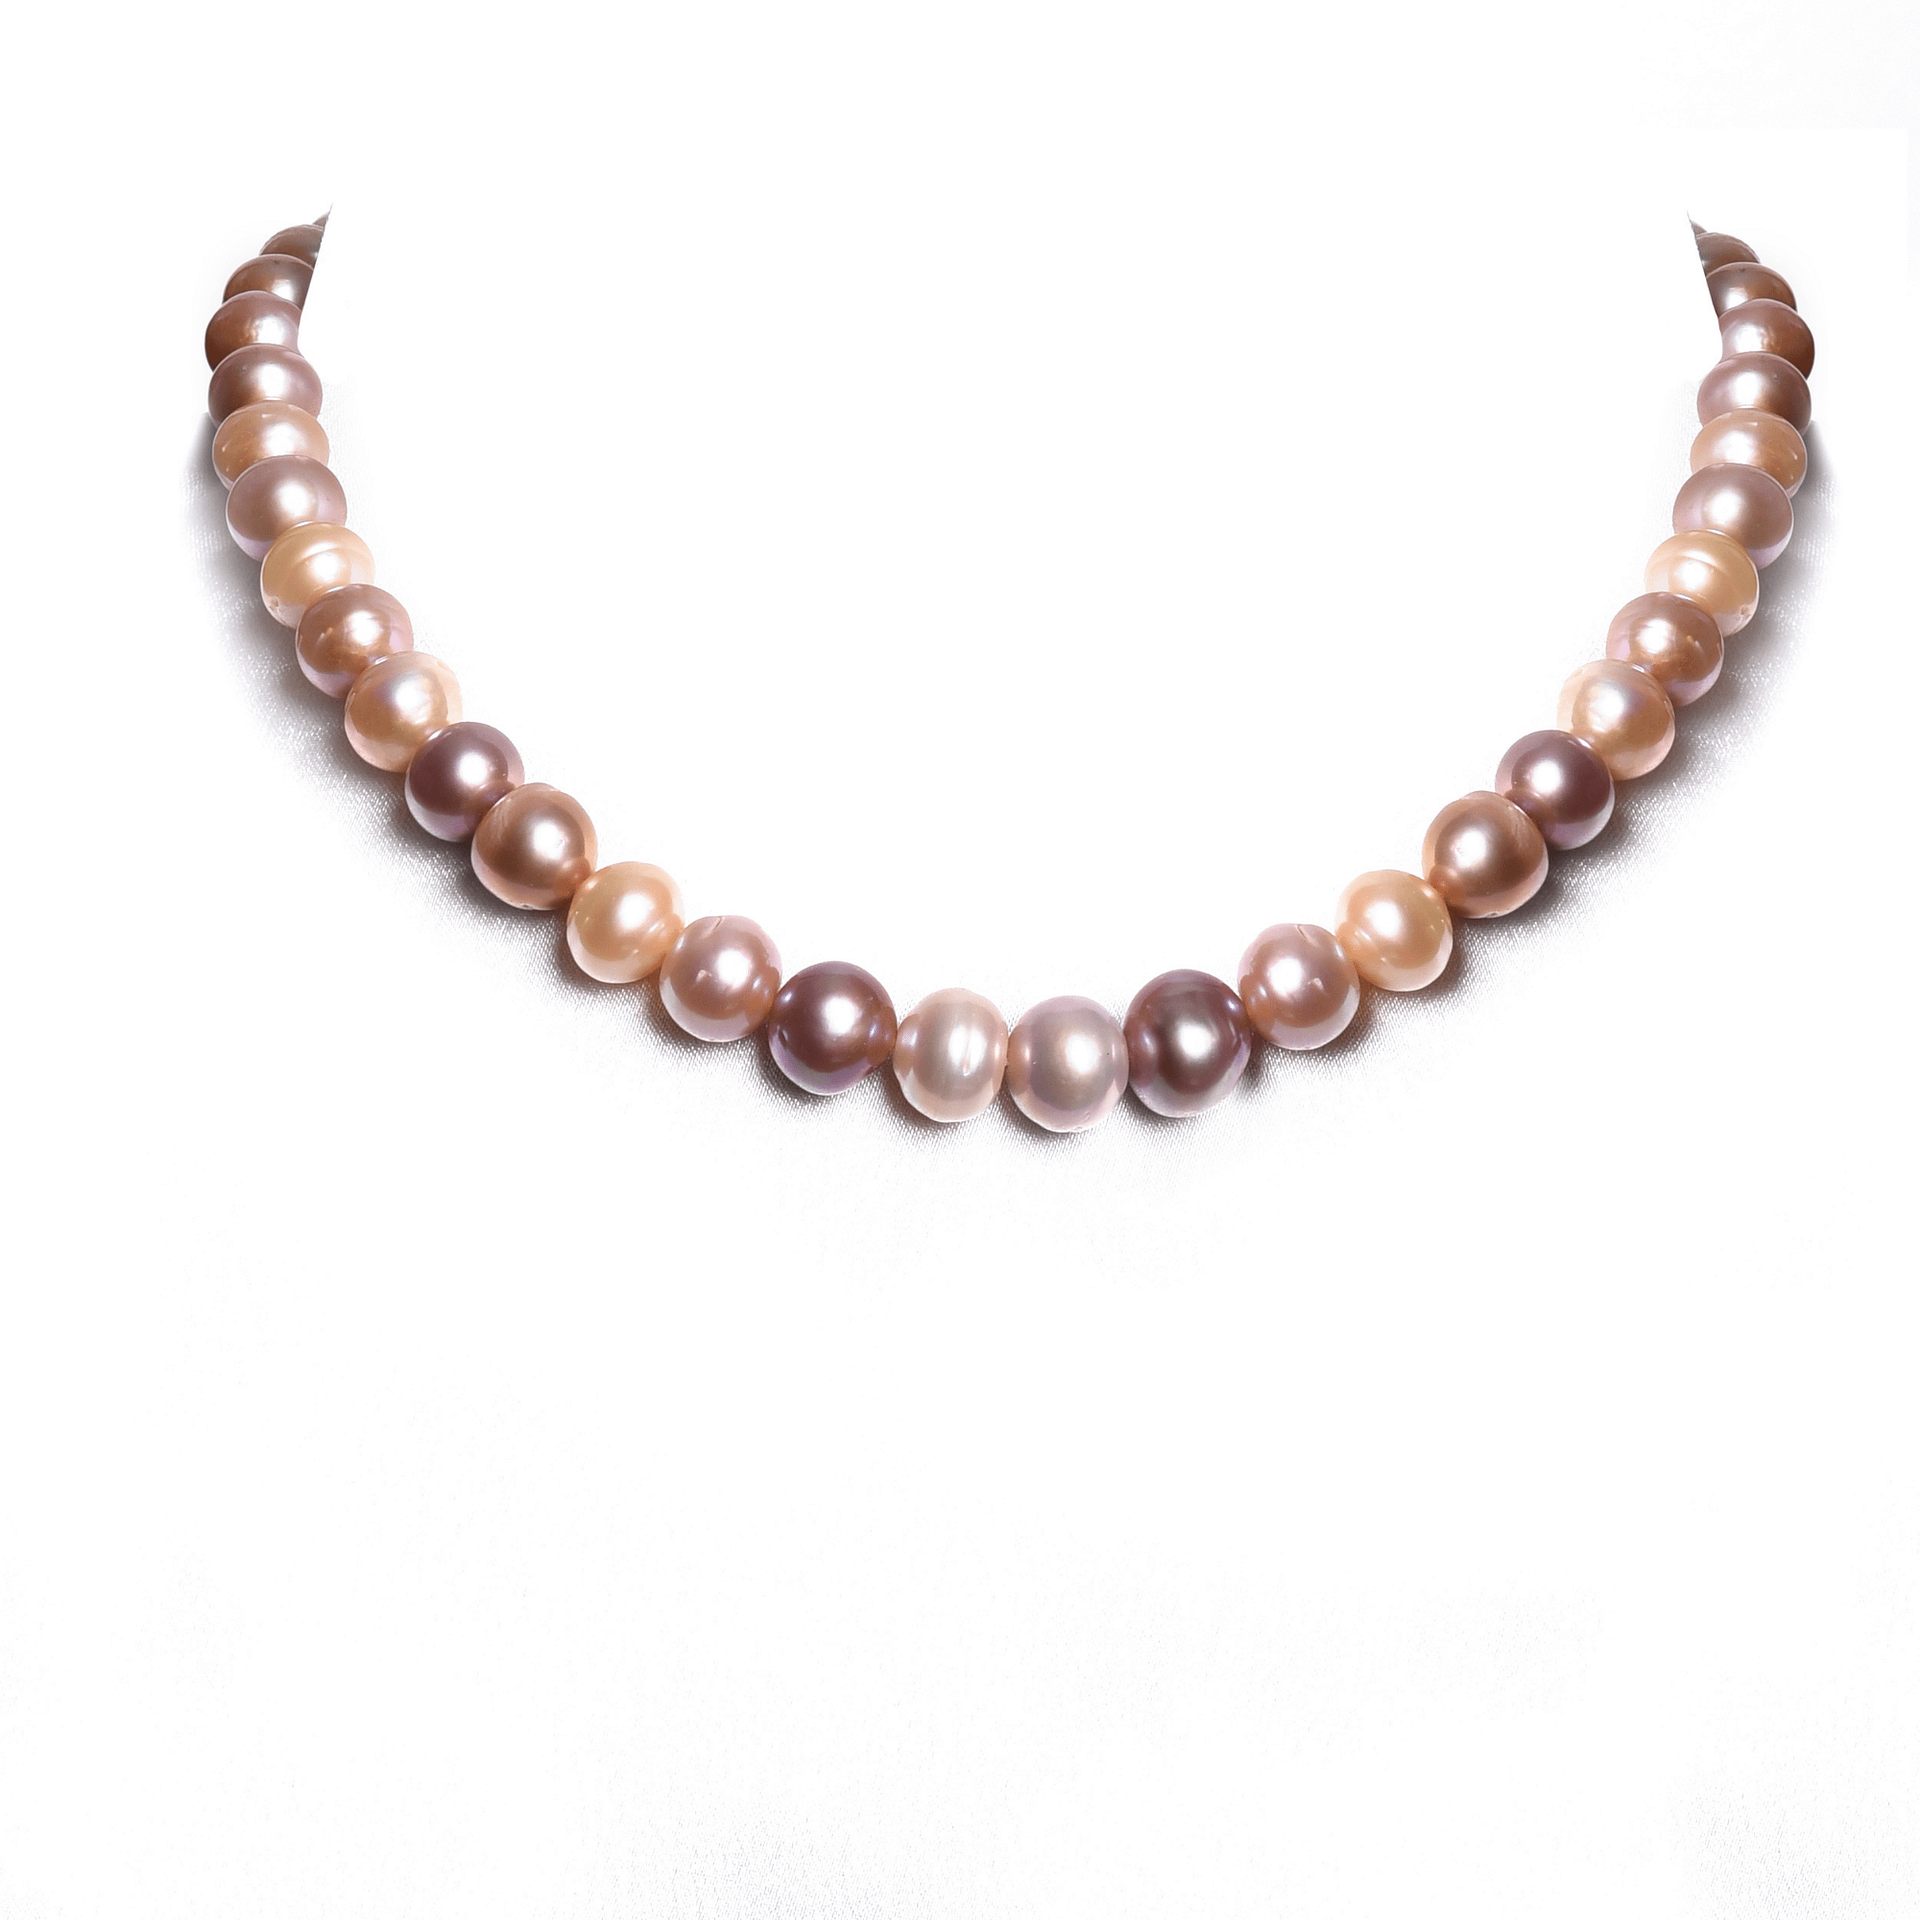 Premium Pearl Necklace in shades of Pink